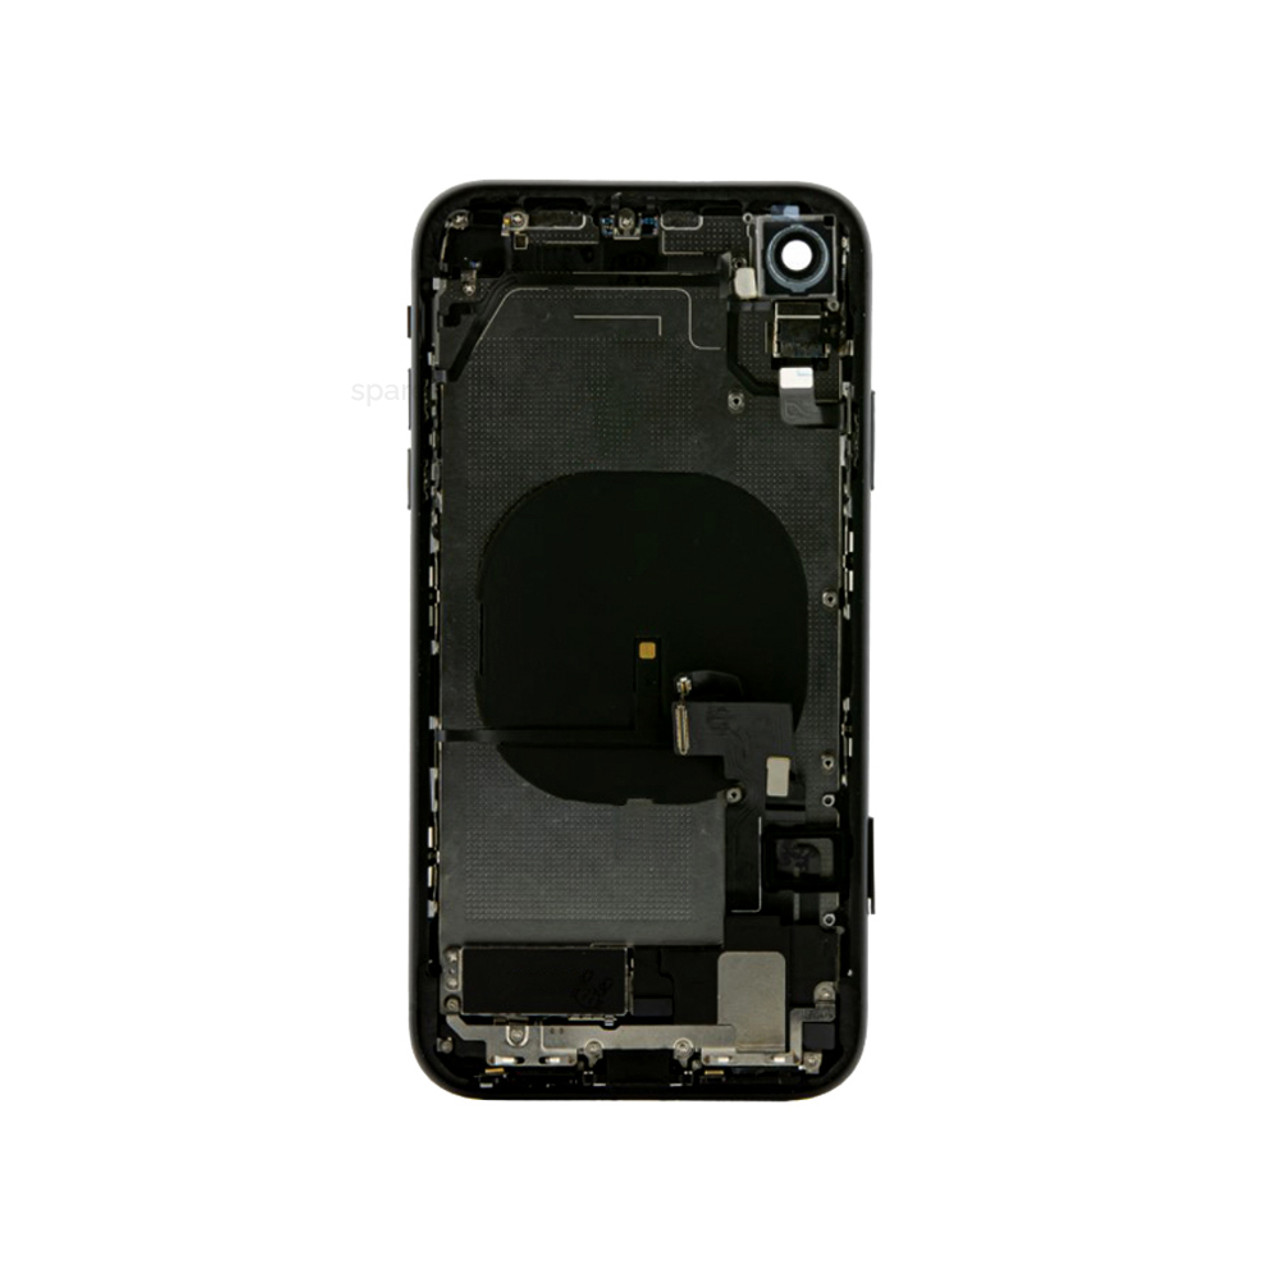 iPhone XR Housing Chassis With Parts Black Replacement